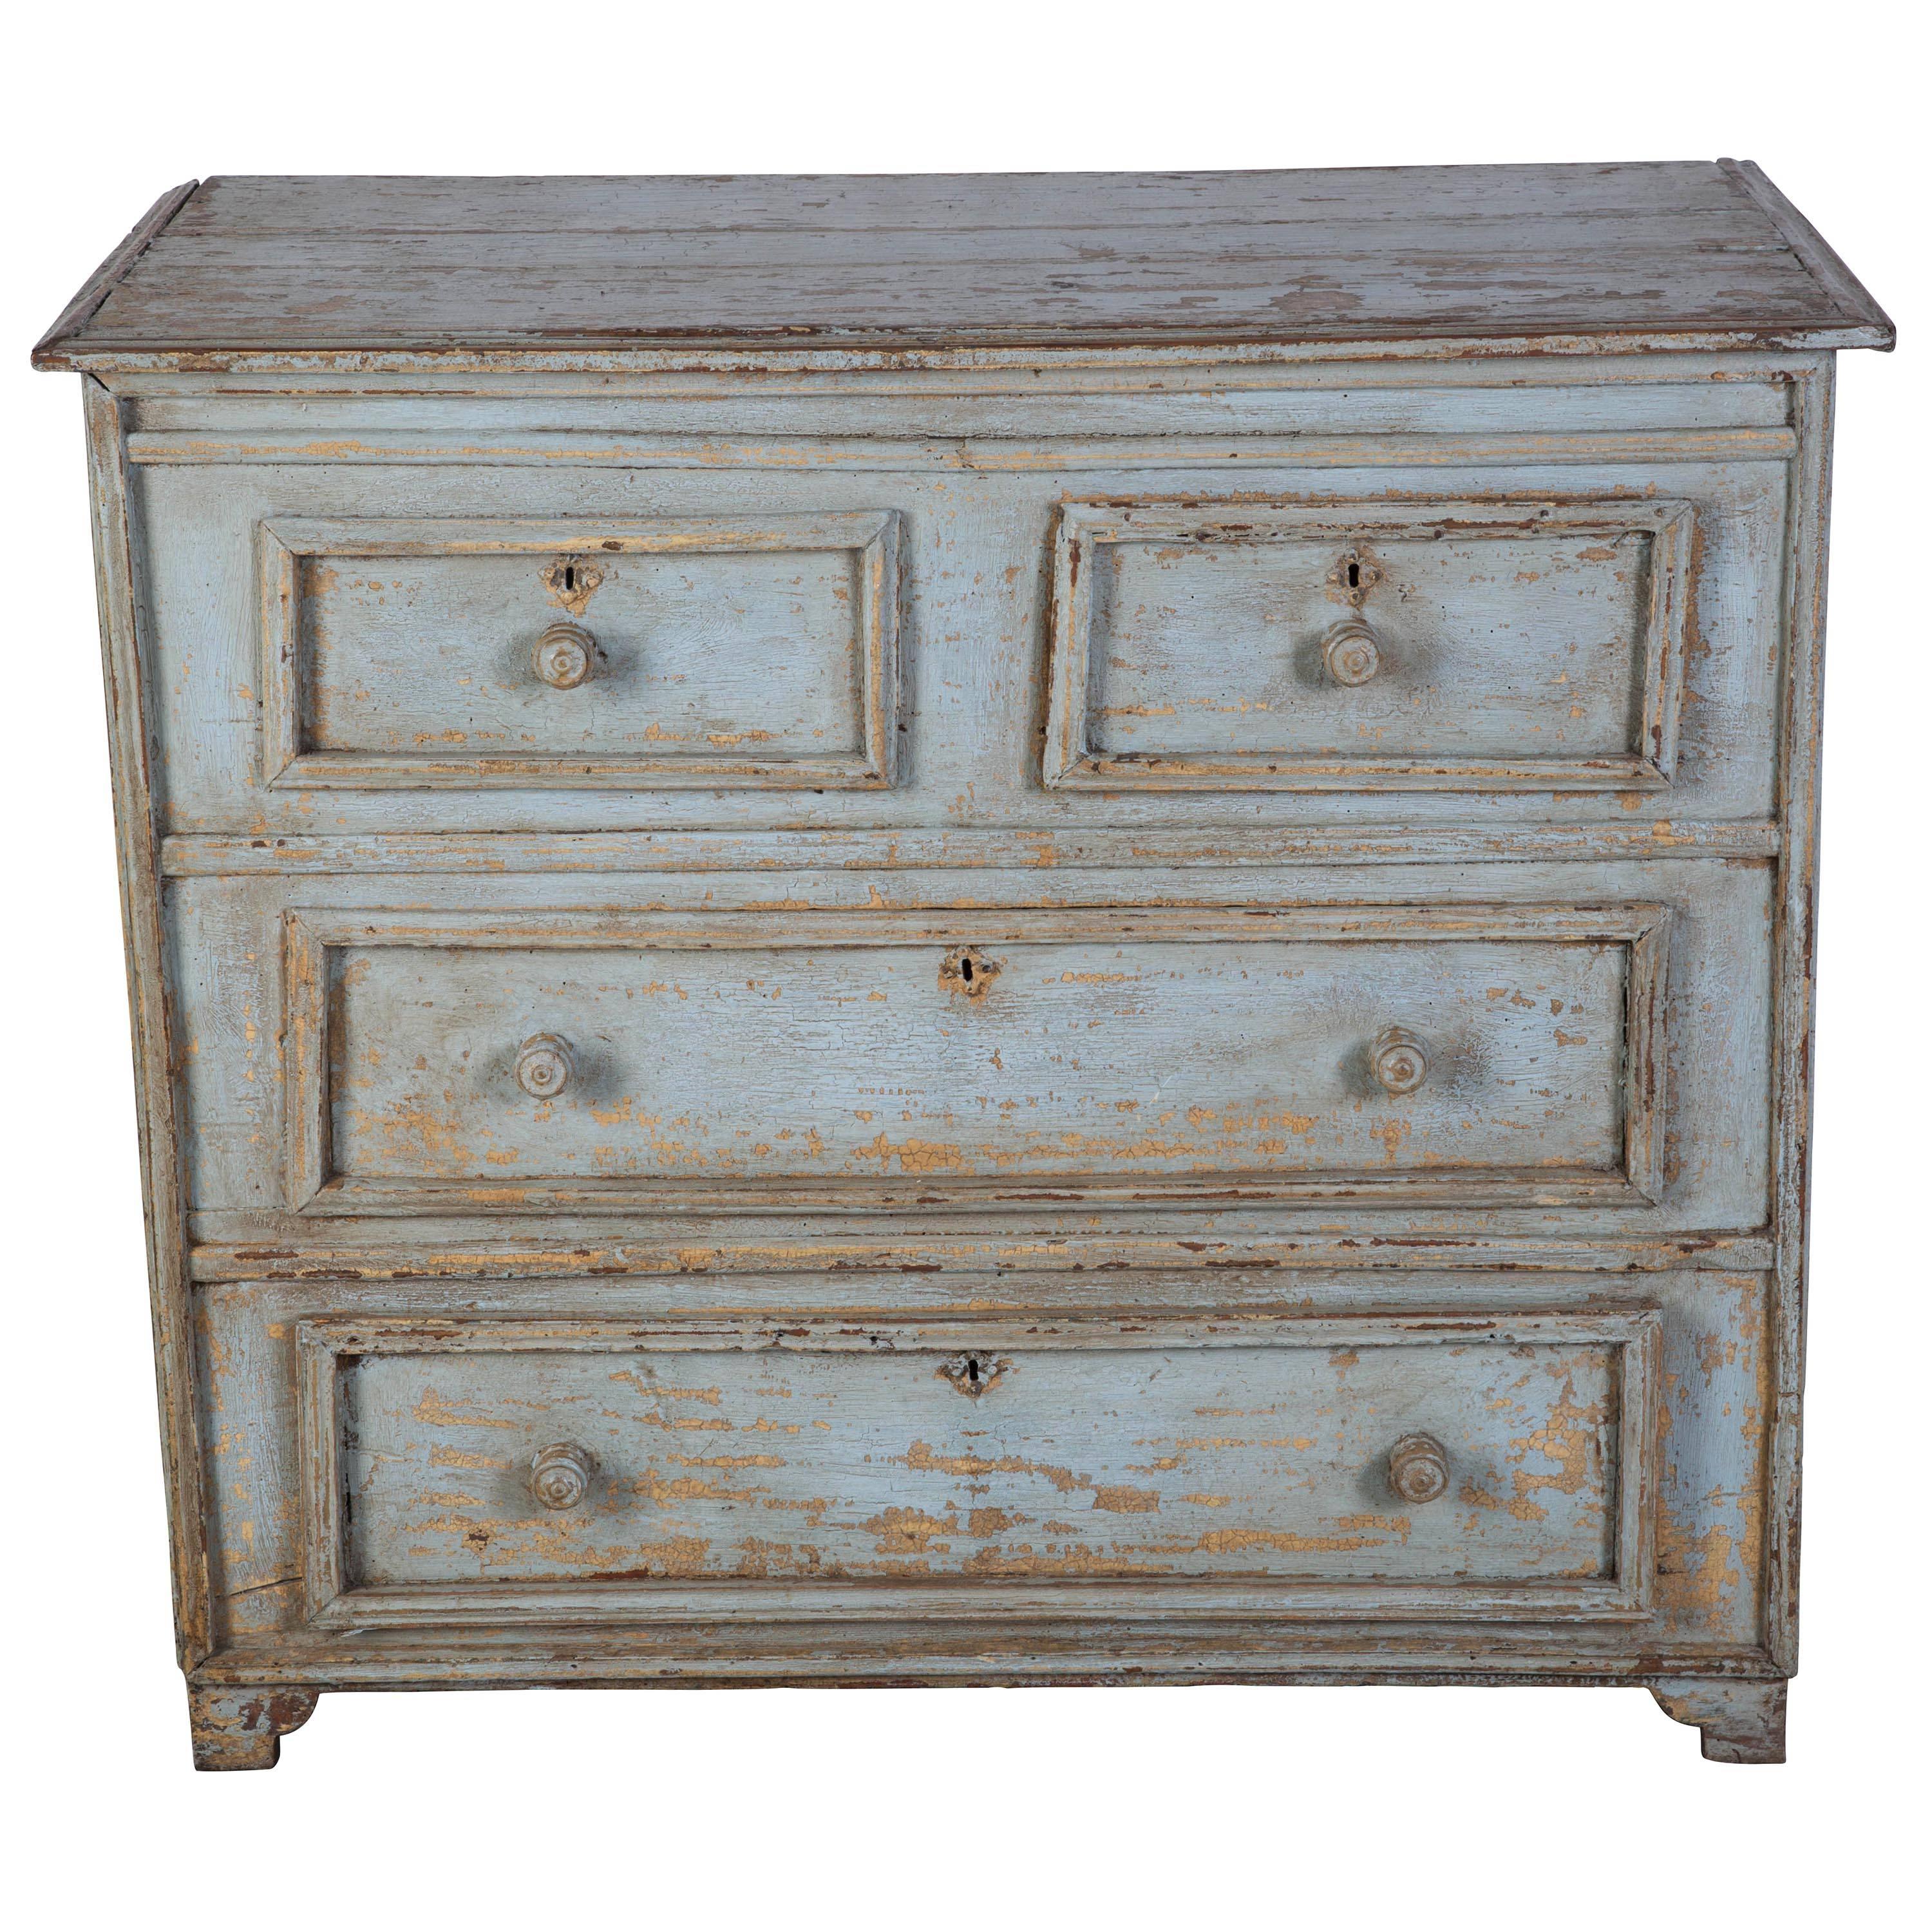 Italian Early 19th Century Painted Chest